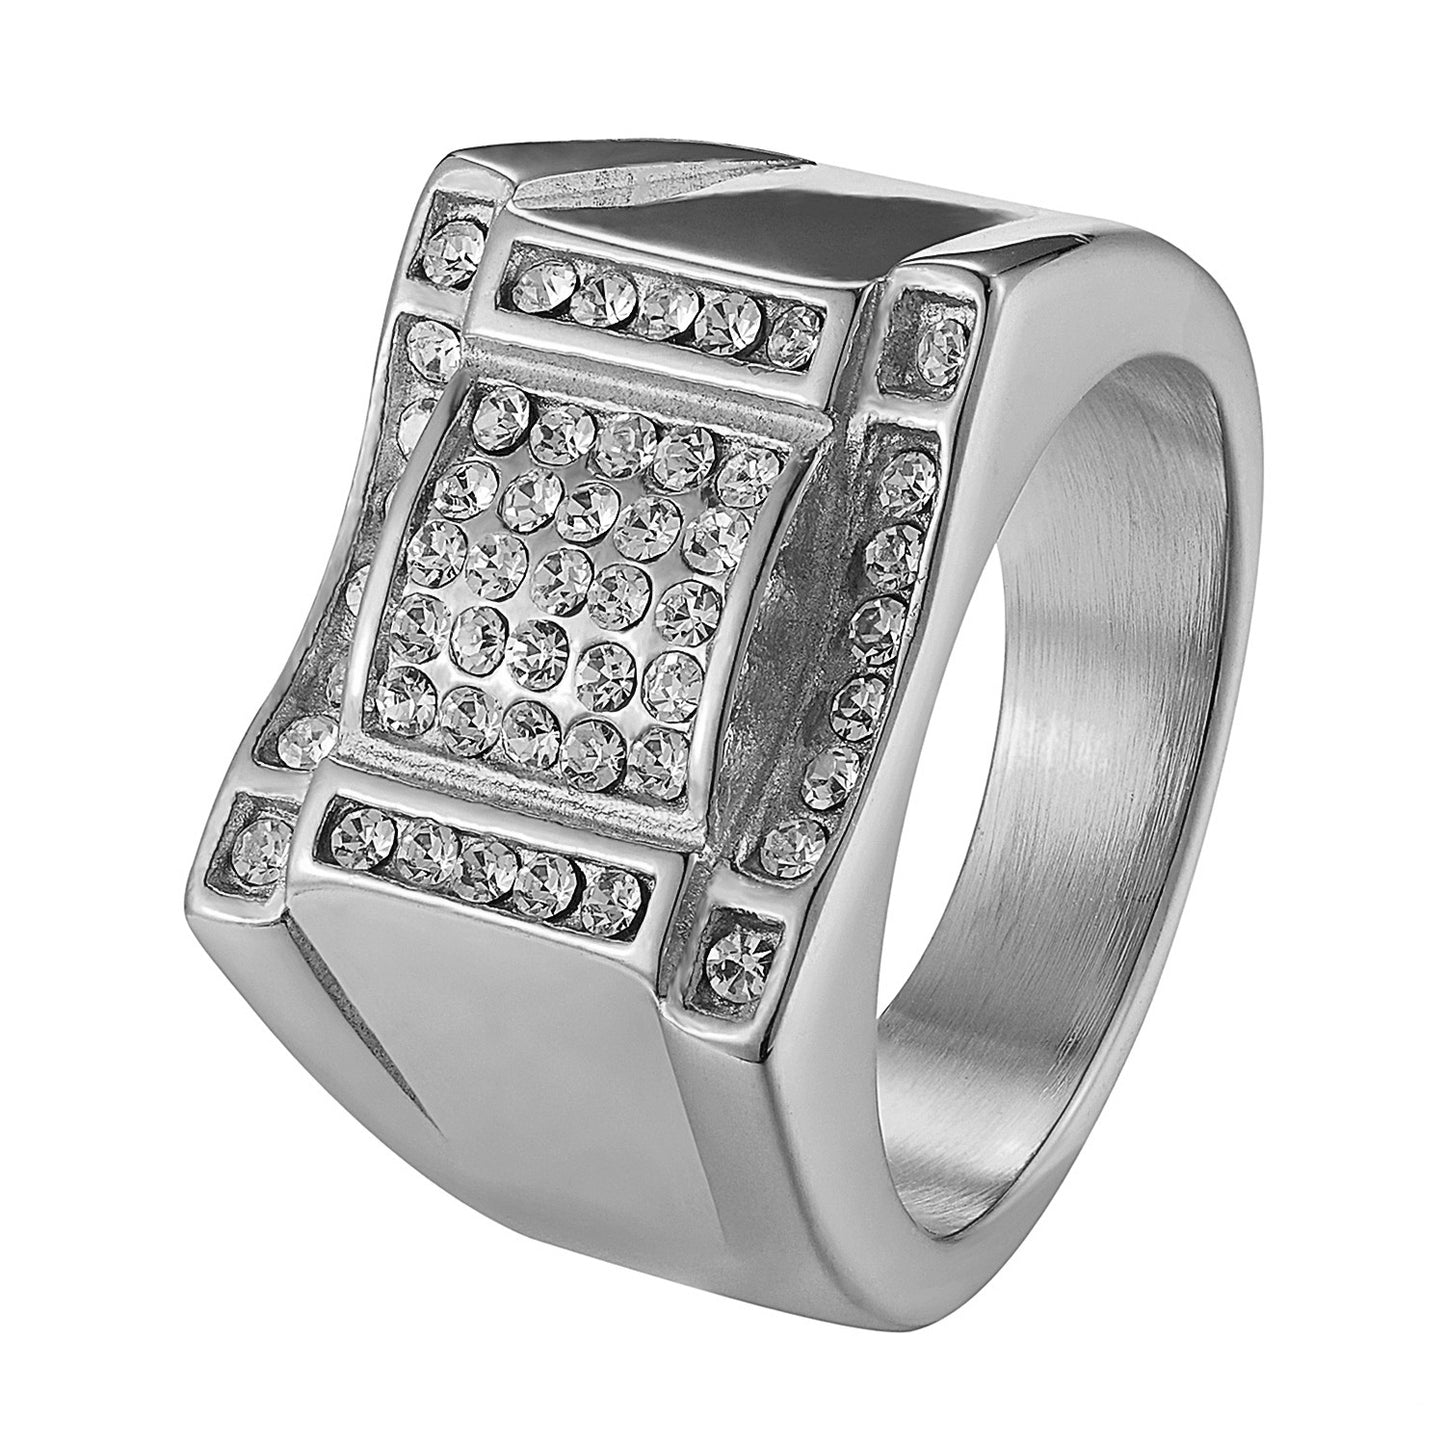 Silver Tone Bling Hip Hop Wedding Bling Mens Pinky Ring Stainless Steel